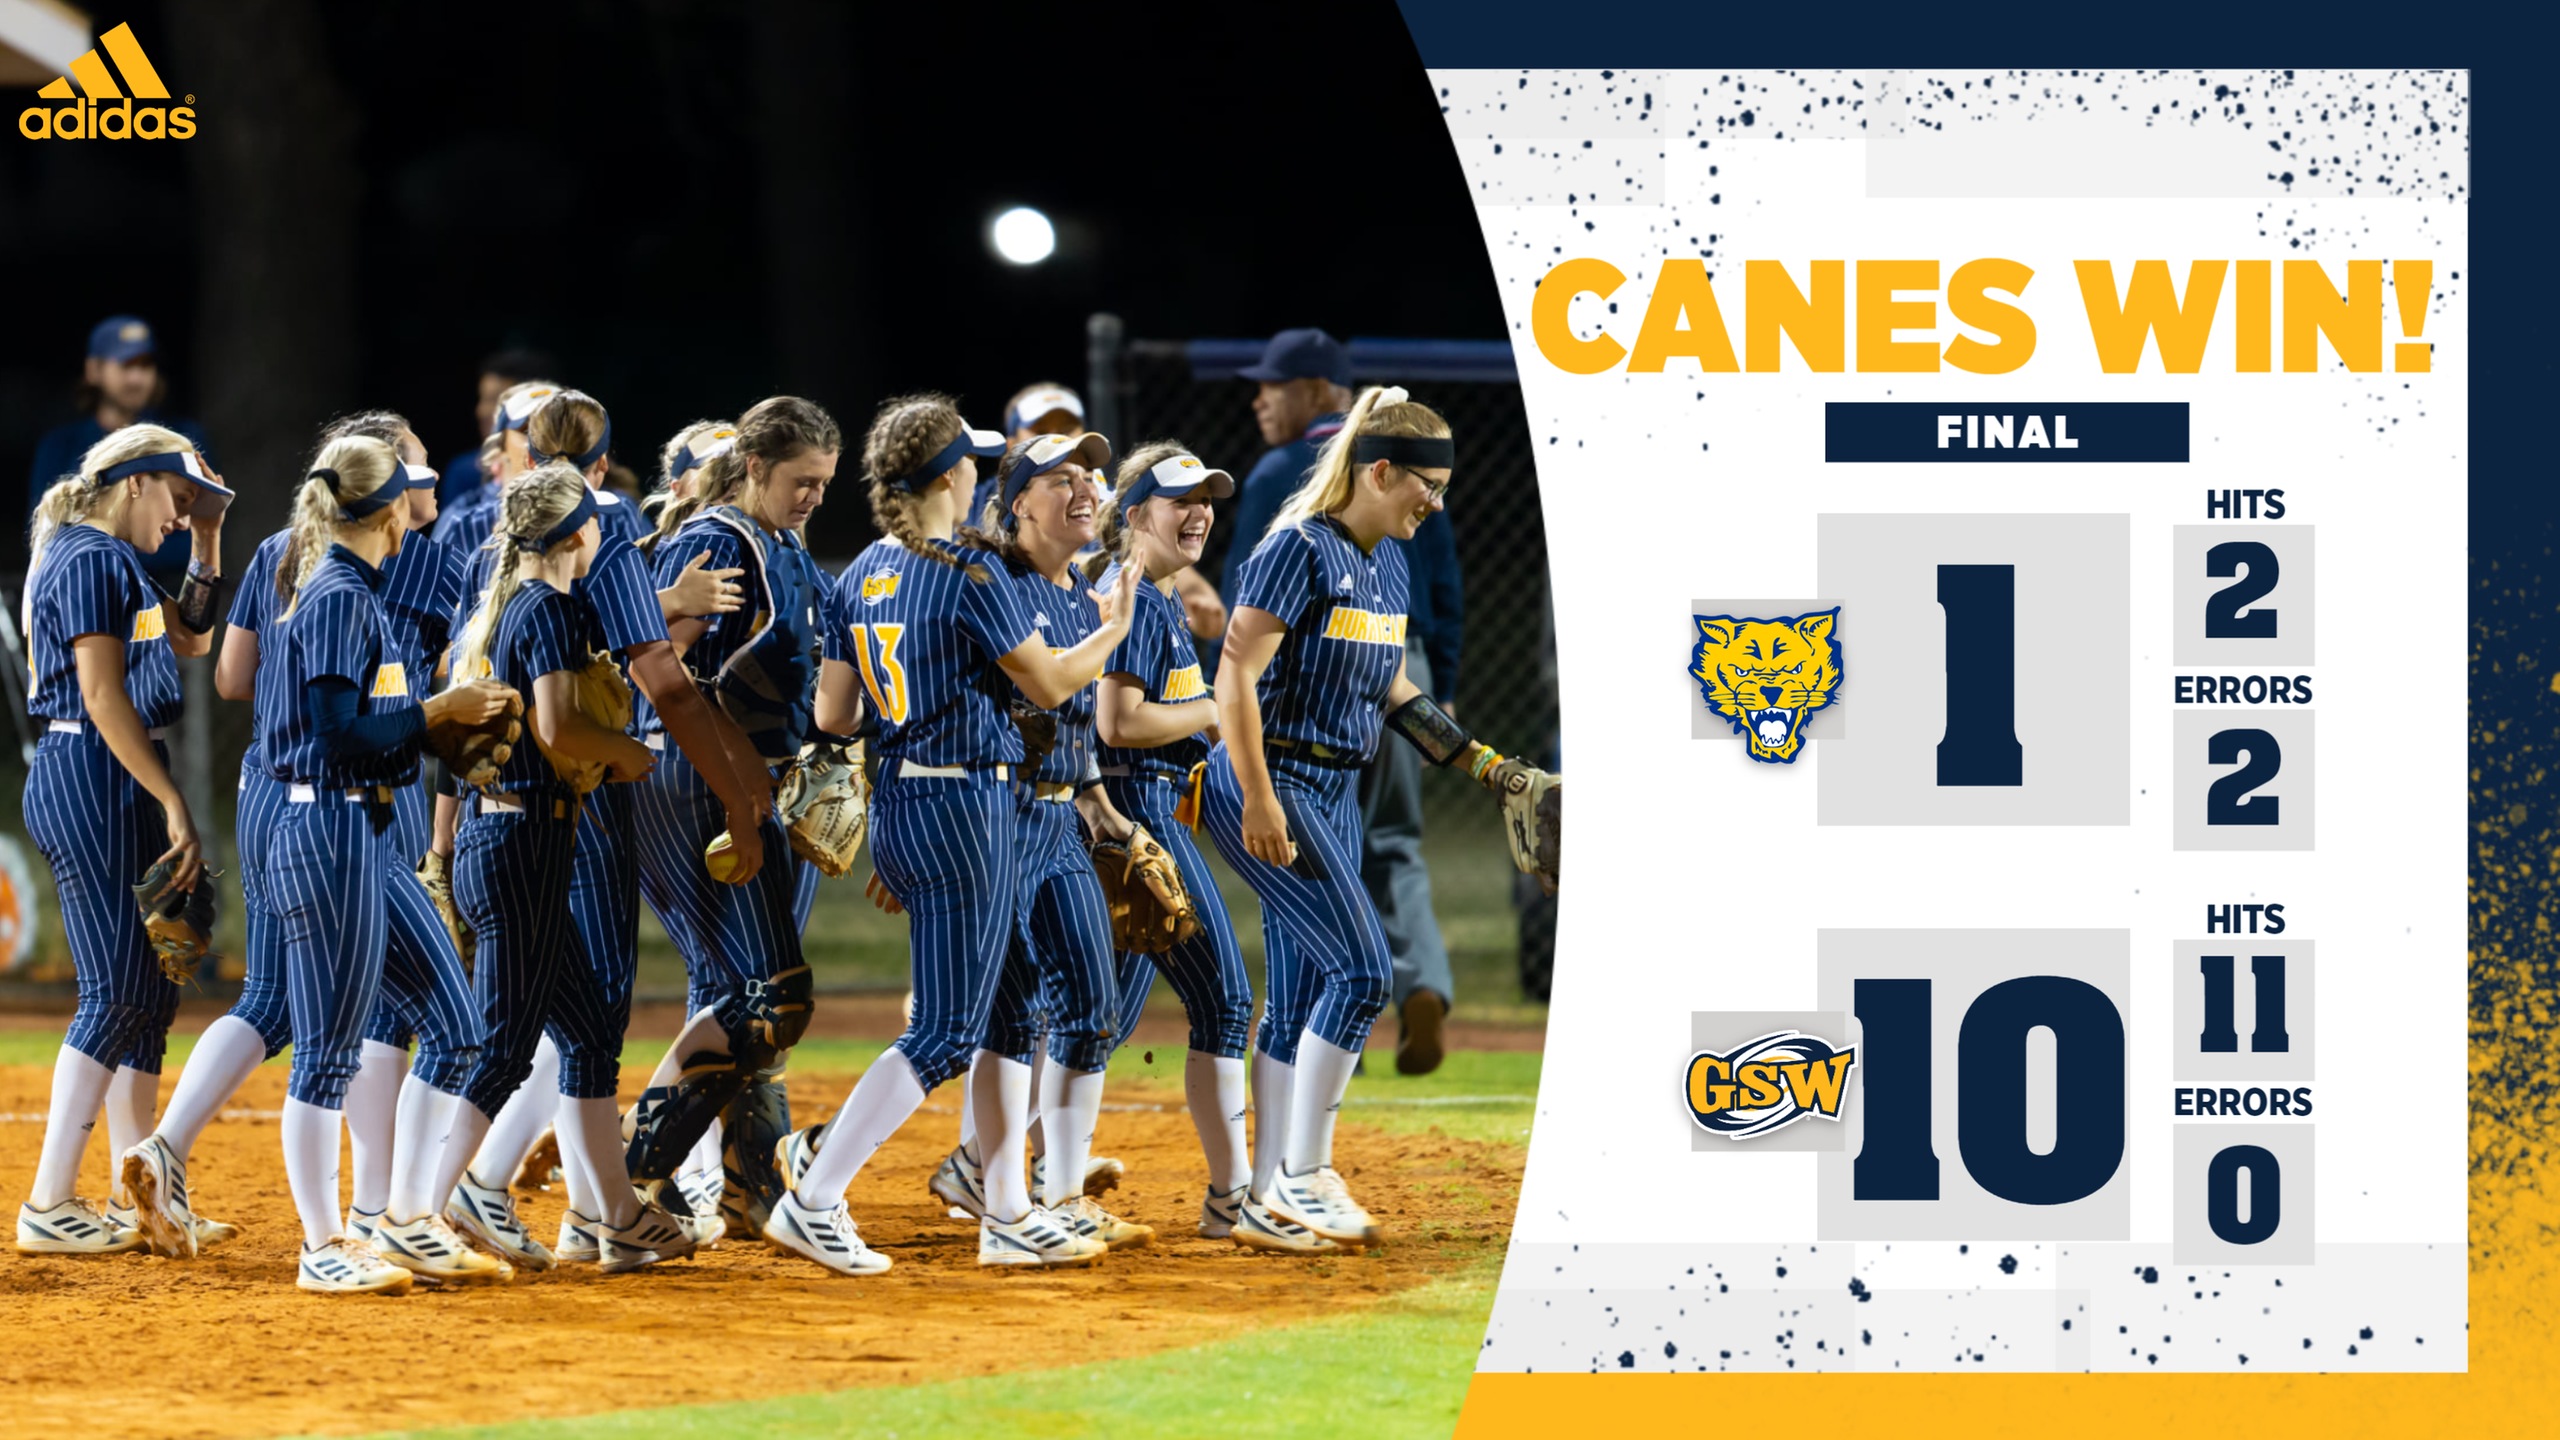 Lady Canes Bring the Thunder in Midweek Win